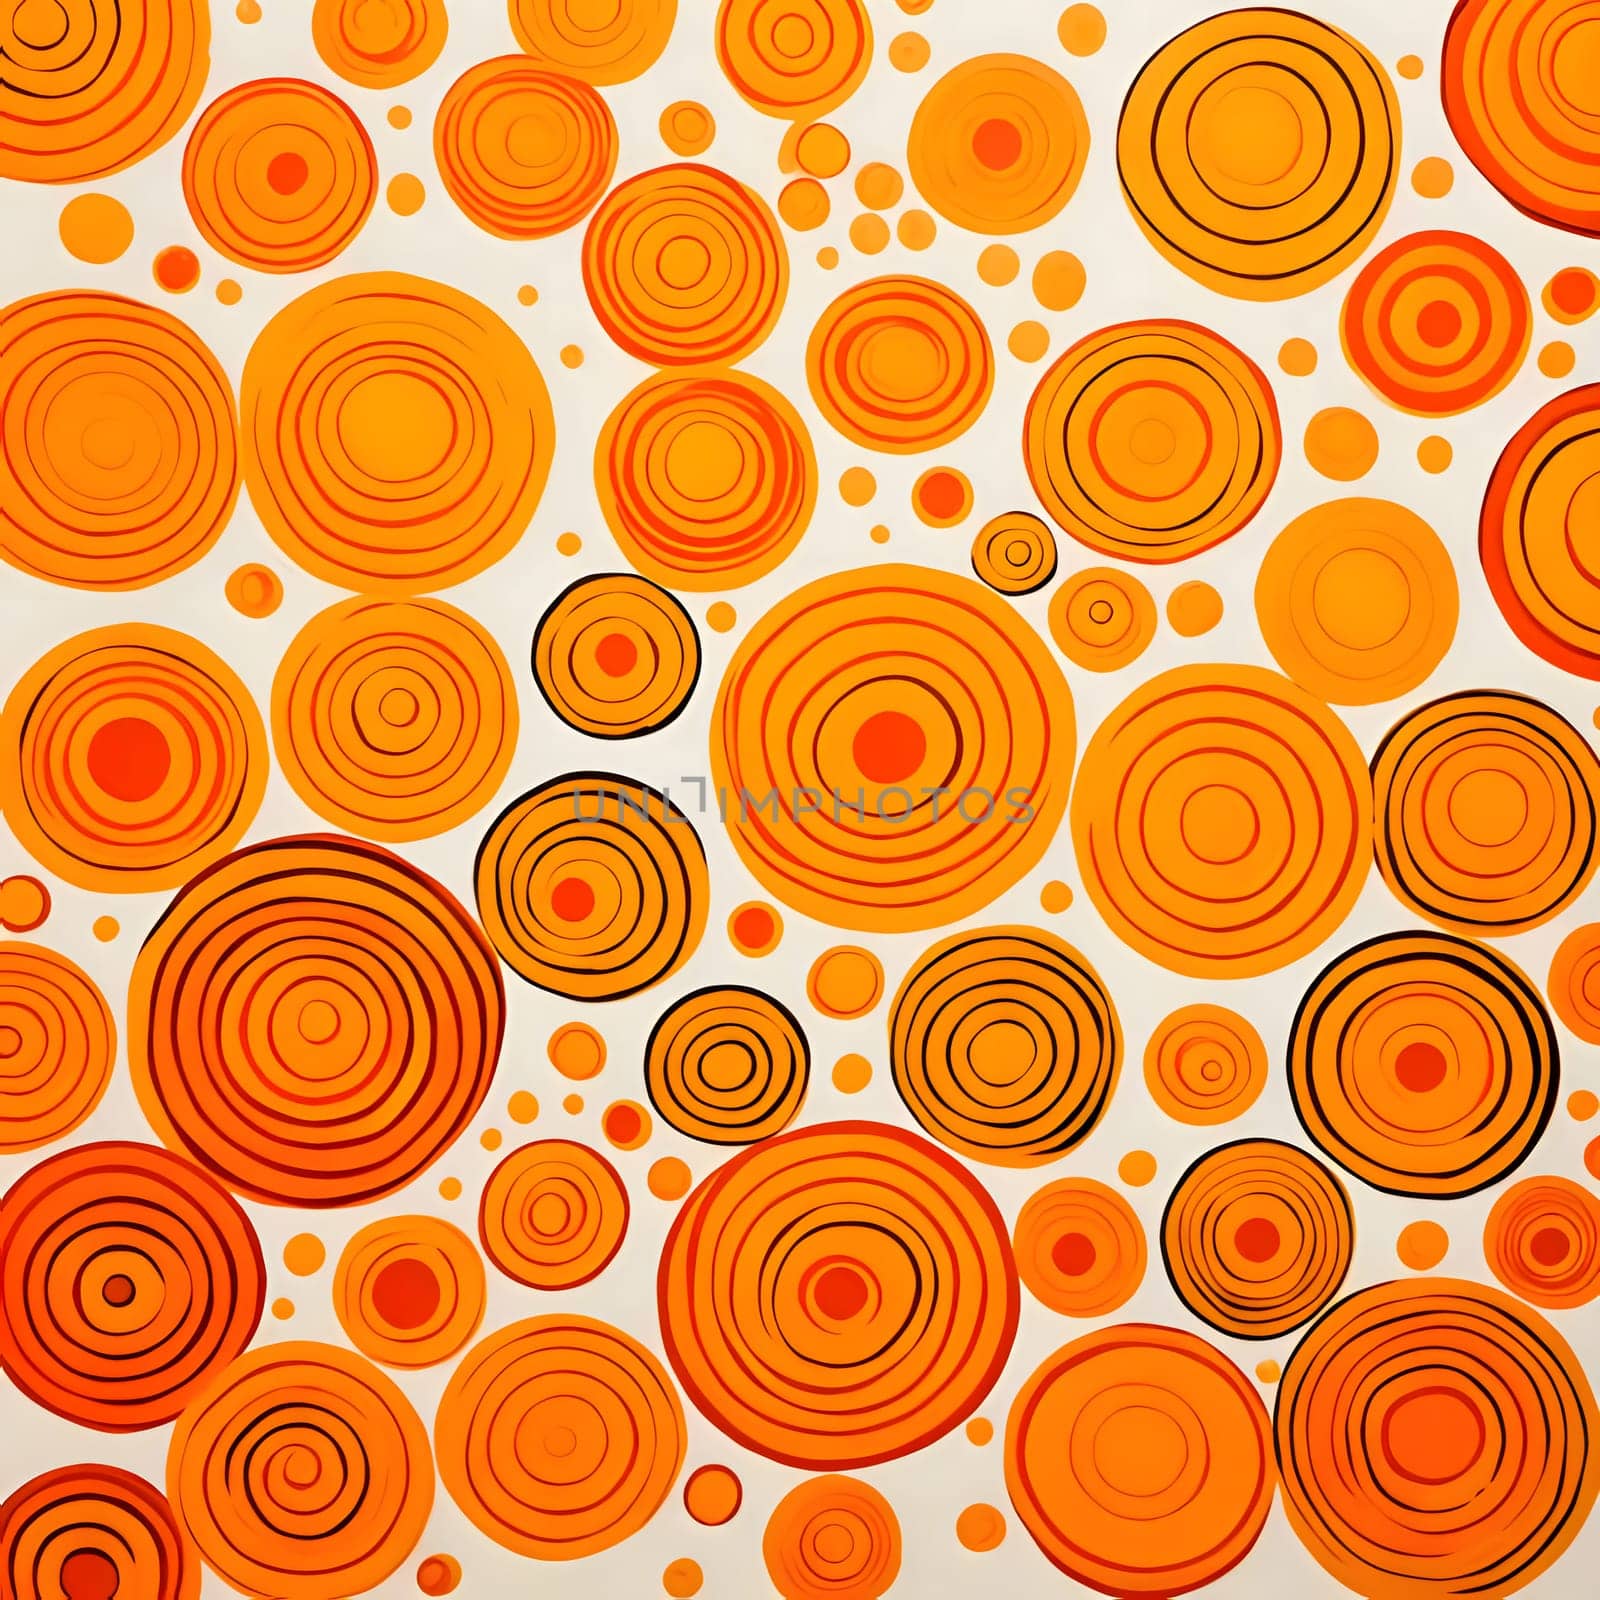 Patterns and banners backgrounds: Abstract orange circles seamless pattern background. Vector illustration for your design.